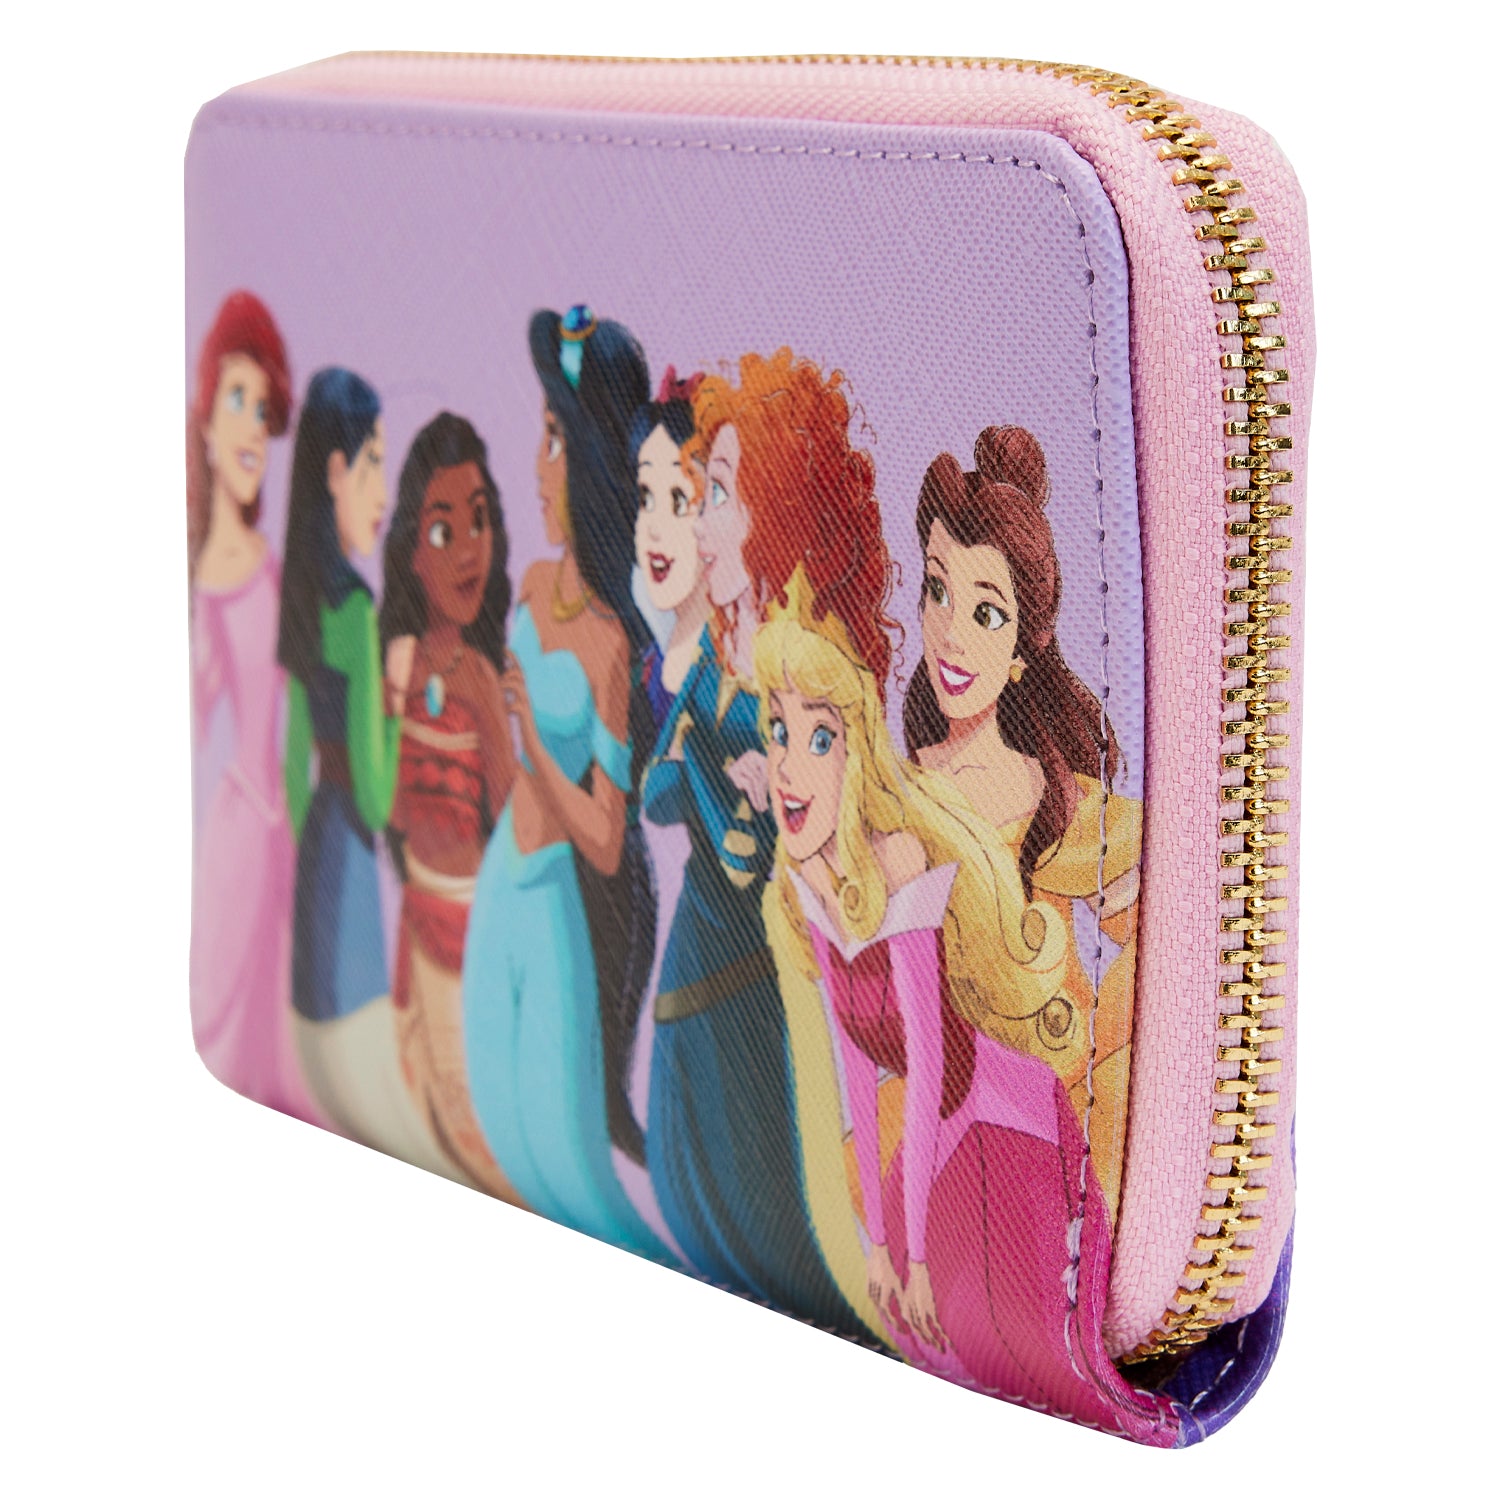 Loungefly x Disney Women's Zip Around Wallet Princess & Villains – Open and  Clothing